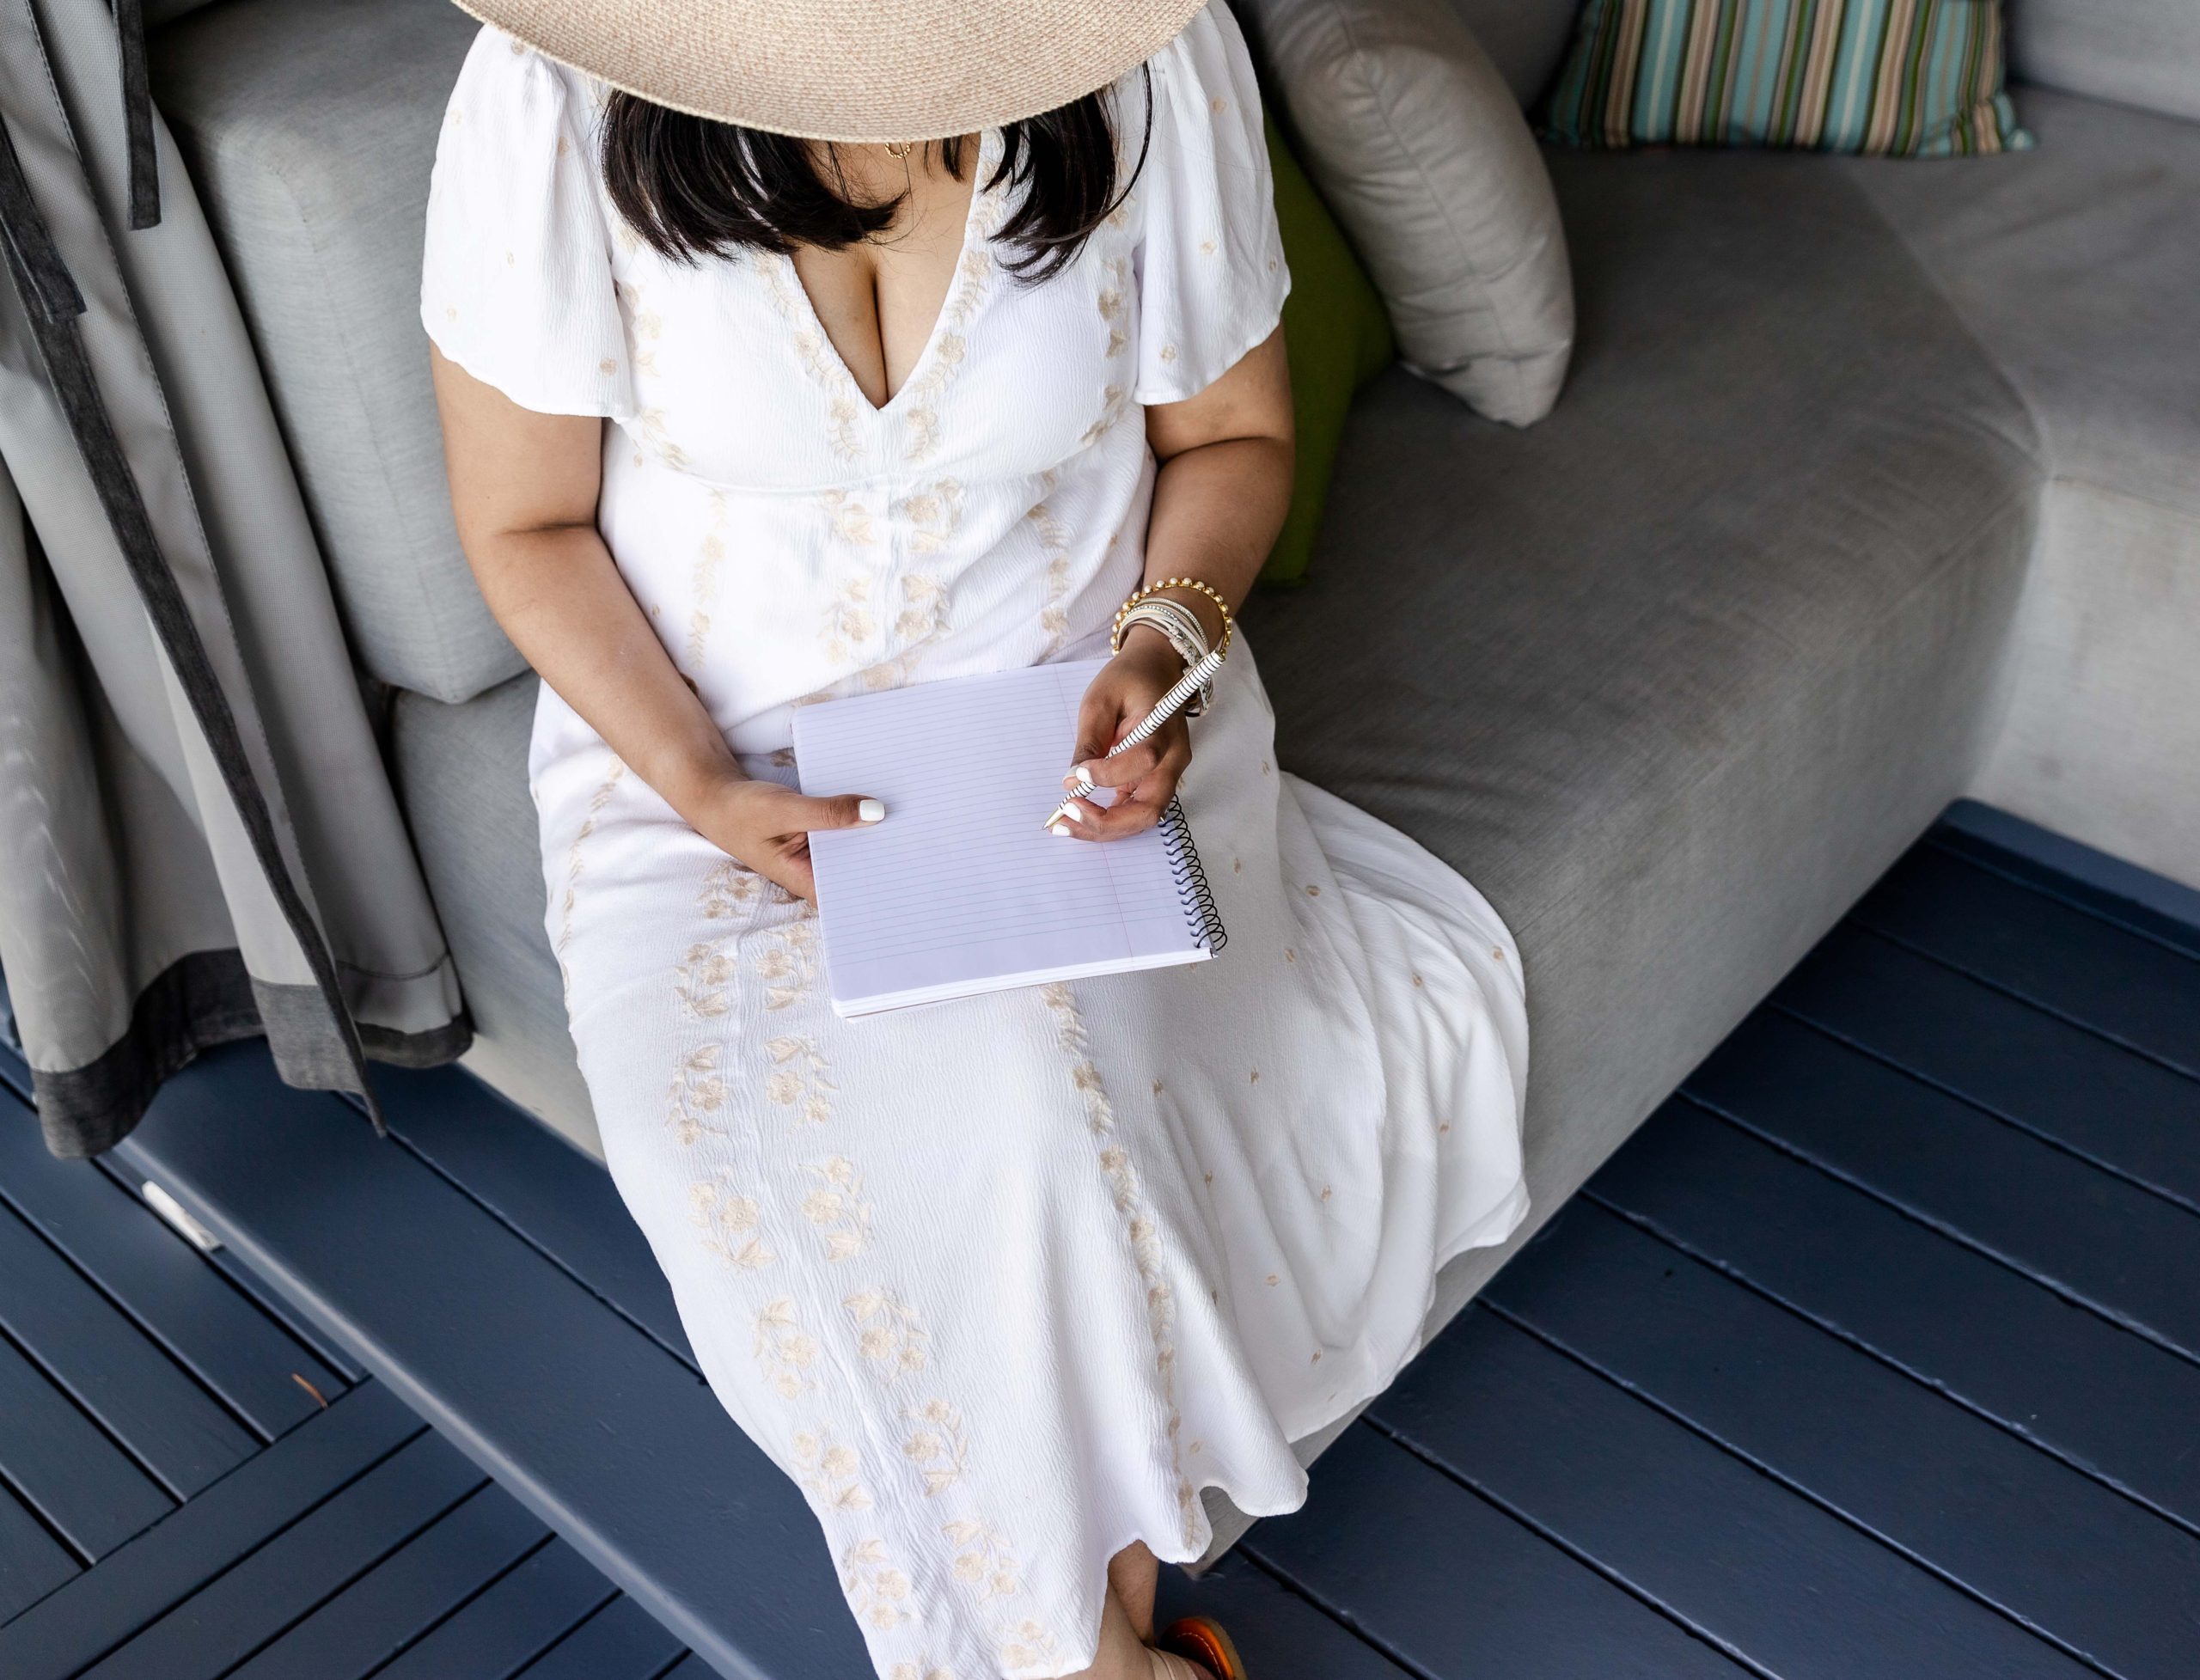 white woman wearing a white dress and a beach hat and writing on a white book while sitting on a couch